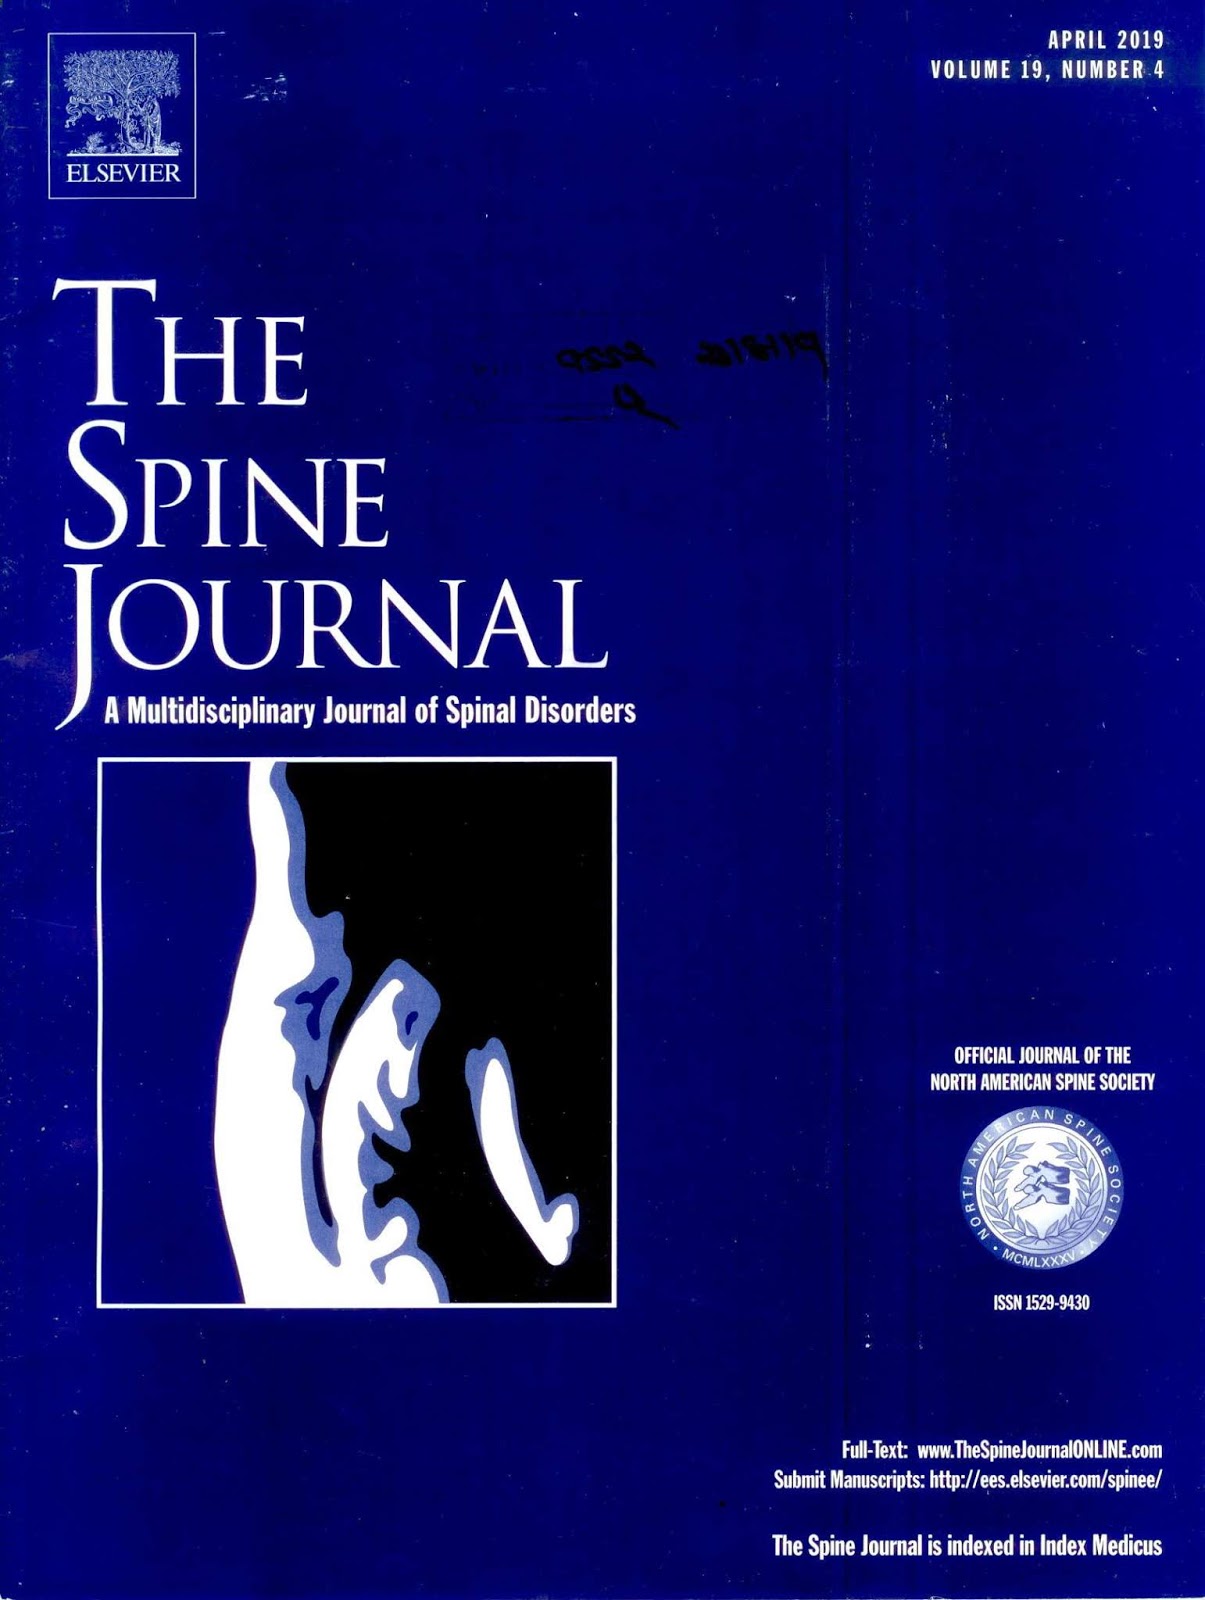 https://www.thespinejournalonline.com/issue/S1529-9430(19)X0003-0